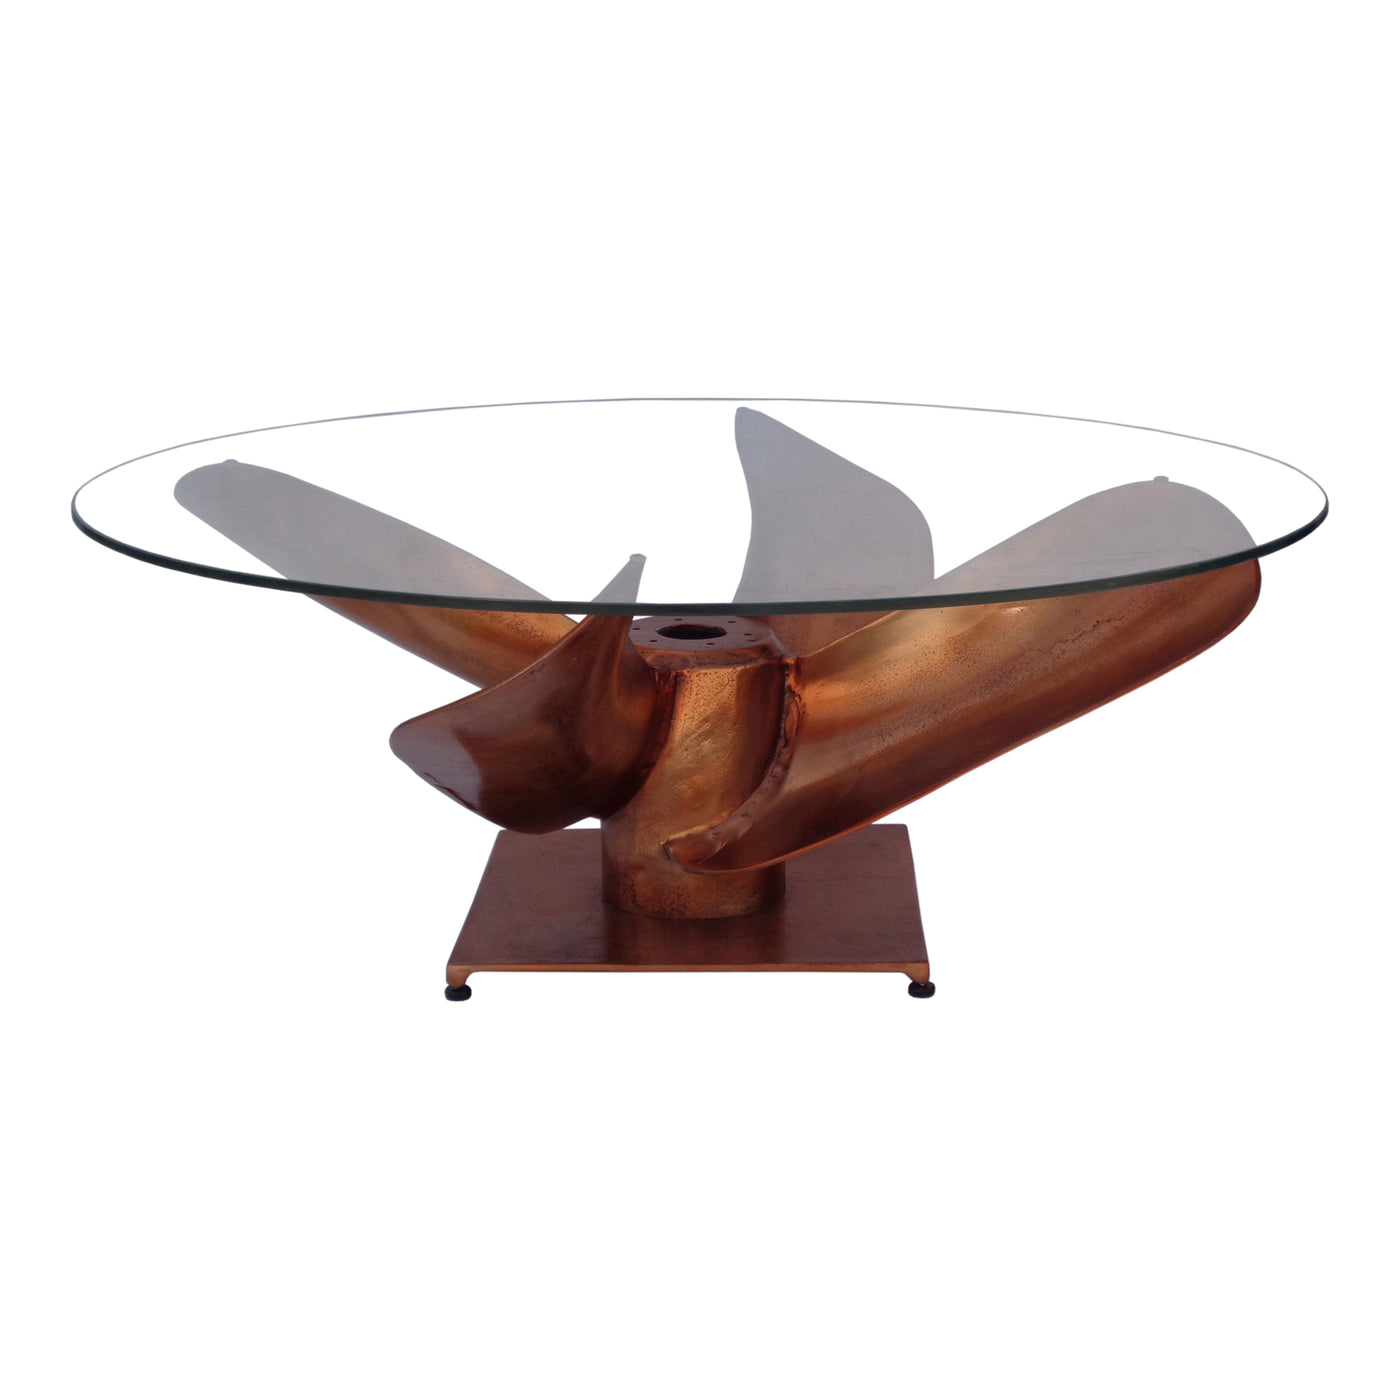 Give your space with a nautical, industrial approach with the Archimedes Coffee Table. Cast in aluminum with a copper fini...